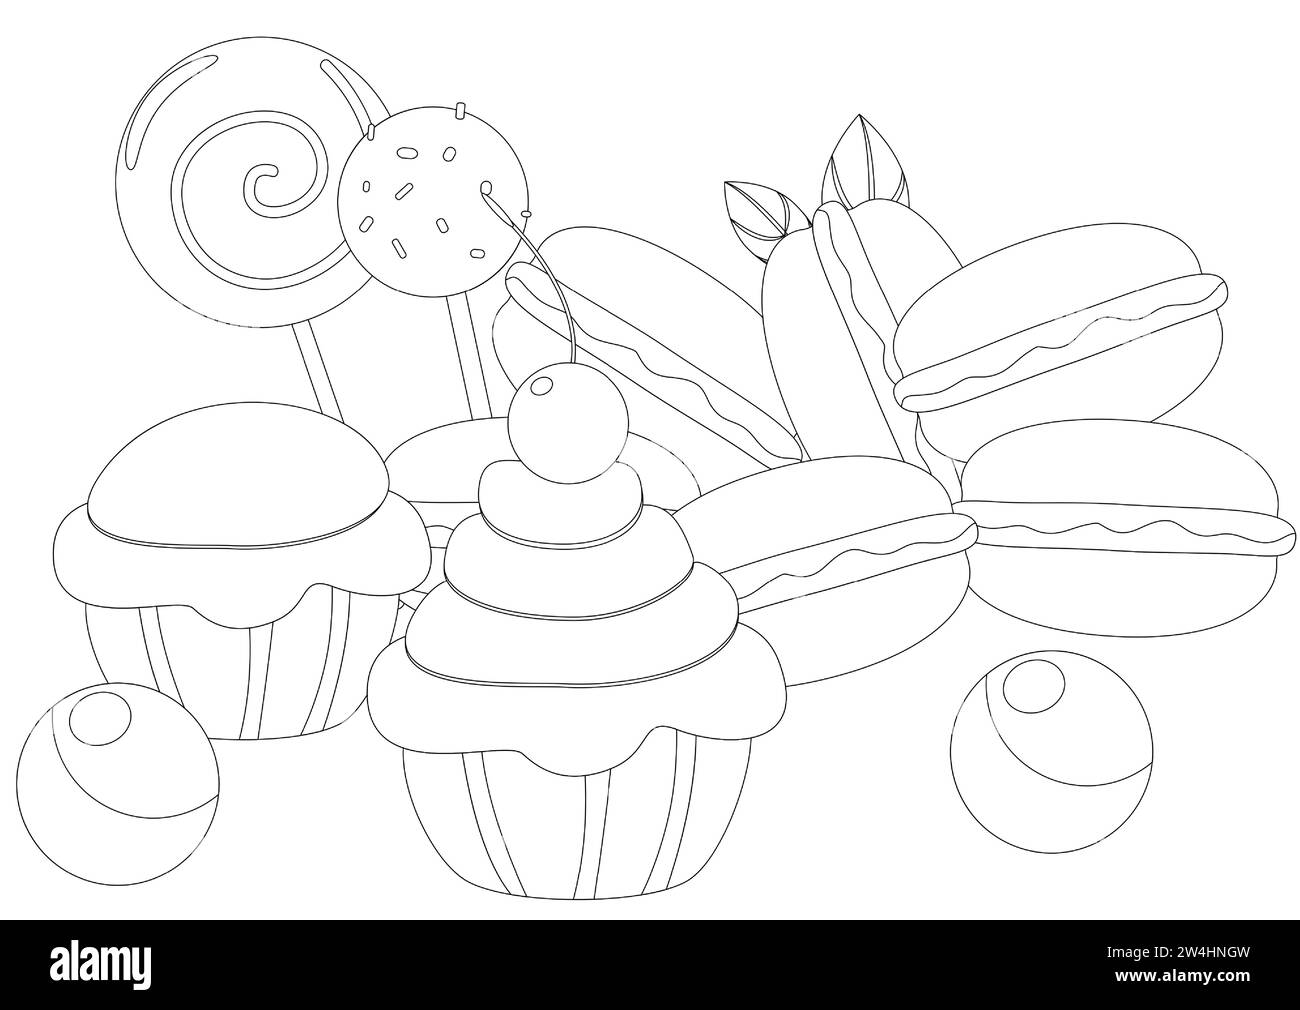 Coloring page. Sweets confectionery donut, muffin, lollipop, macaron. Horizontal banner illustration of sweets in cartoon style. Stock Vector